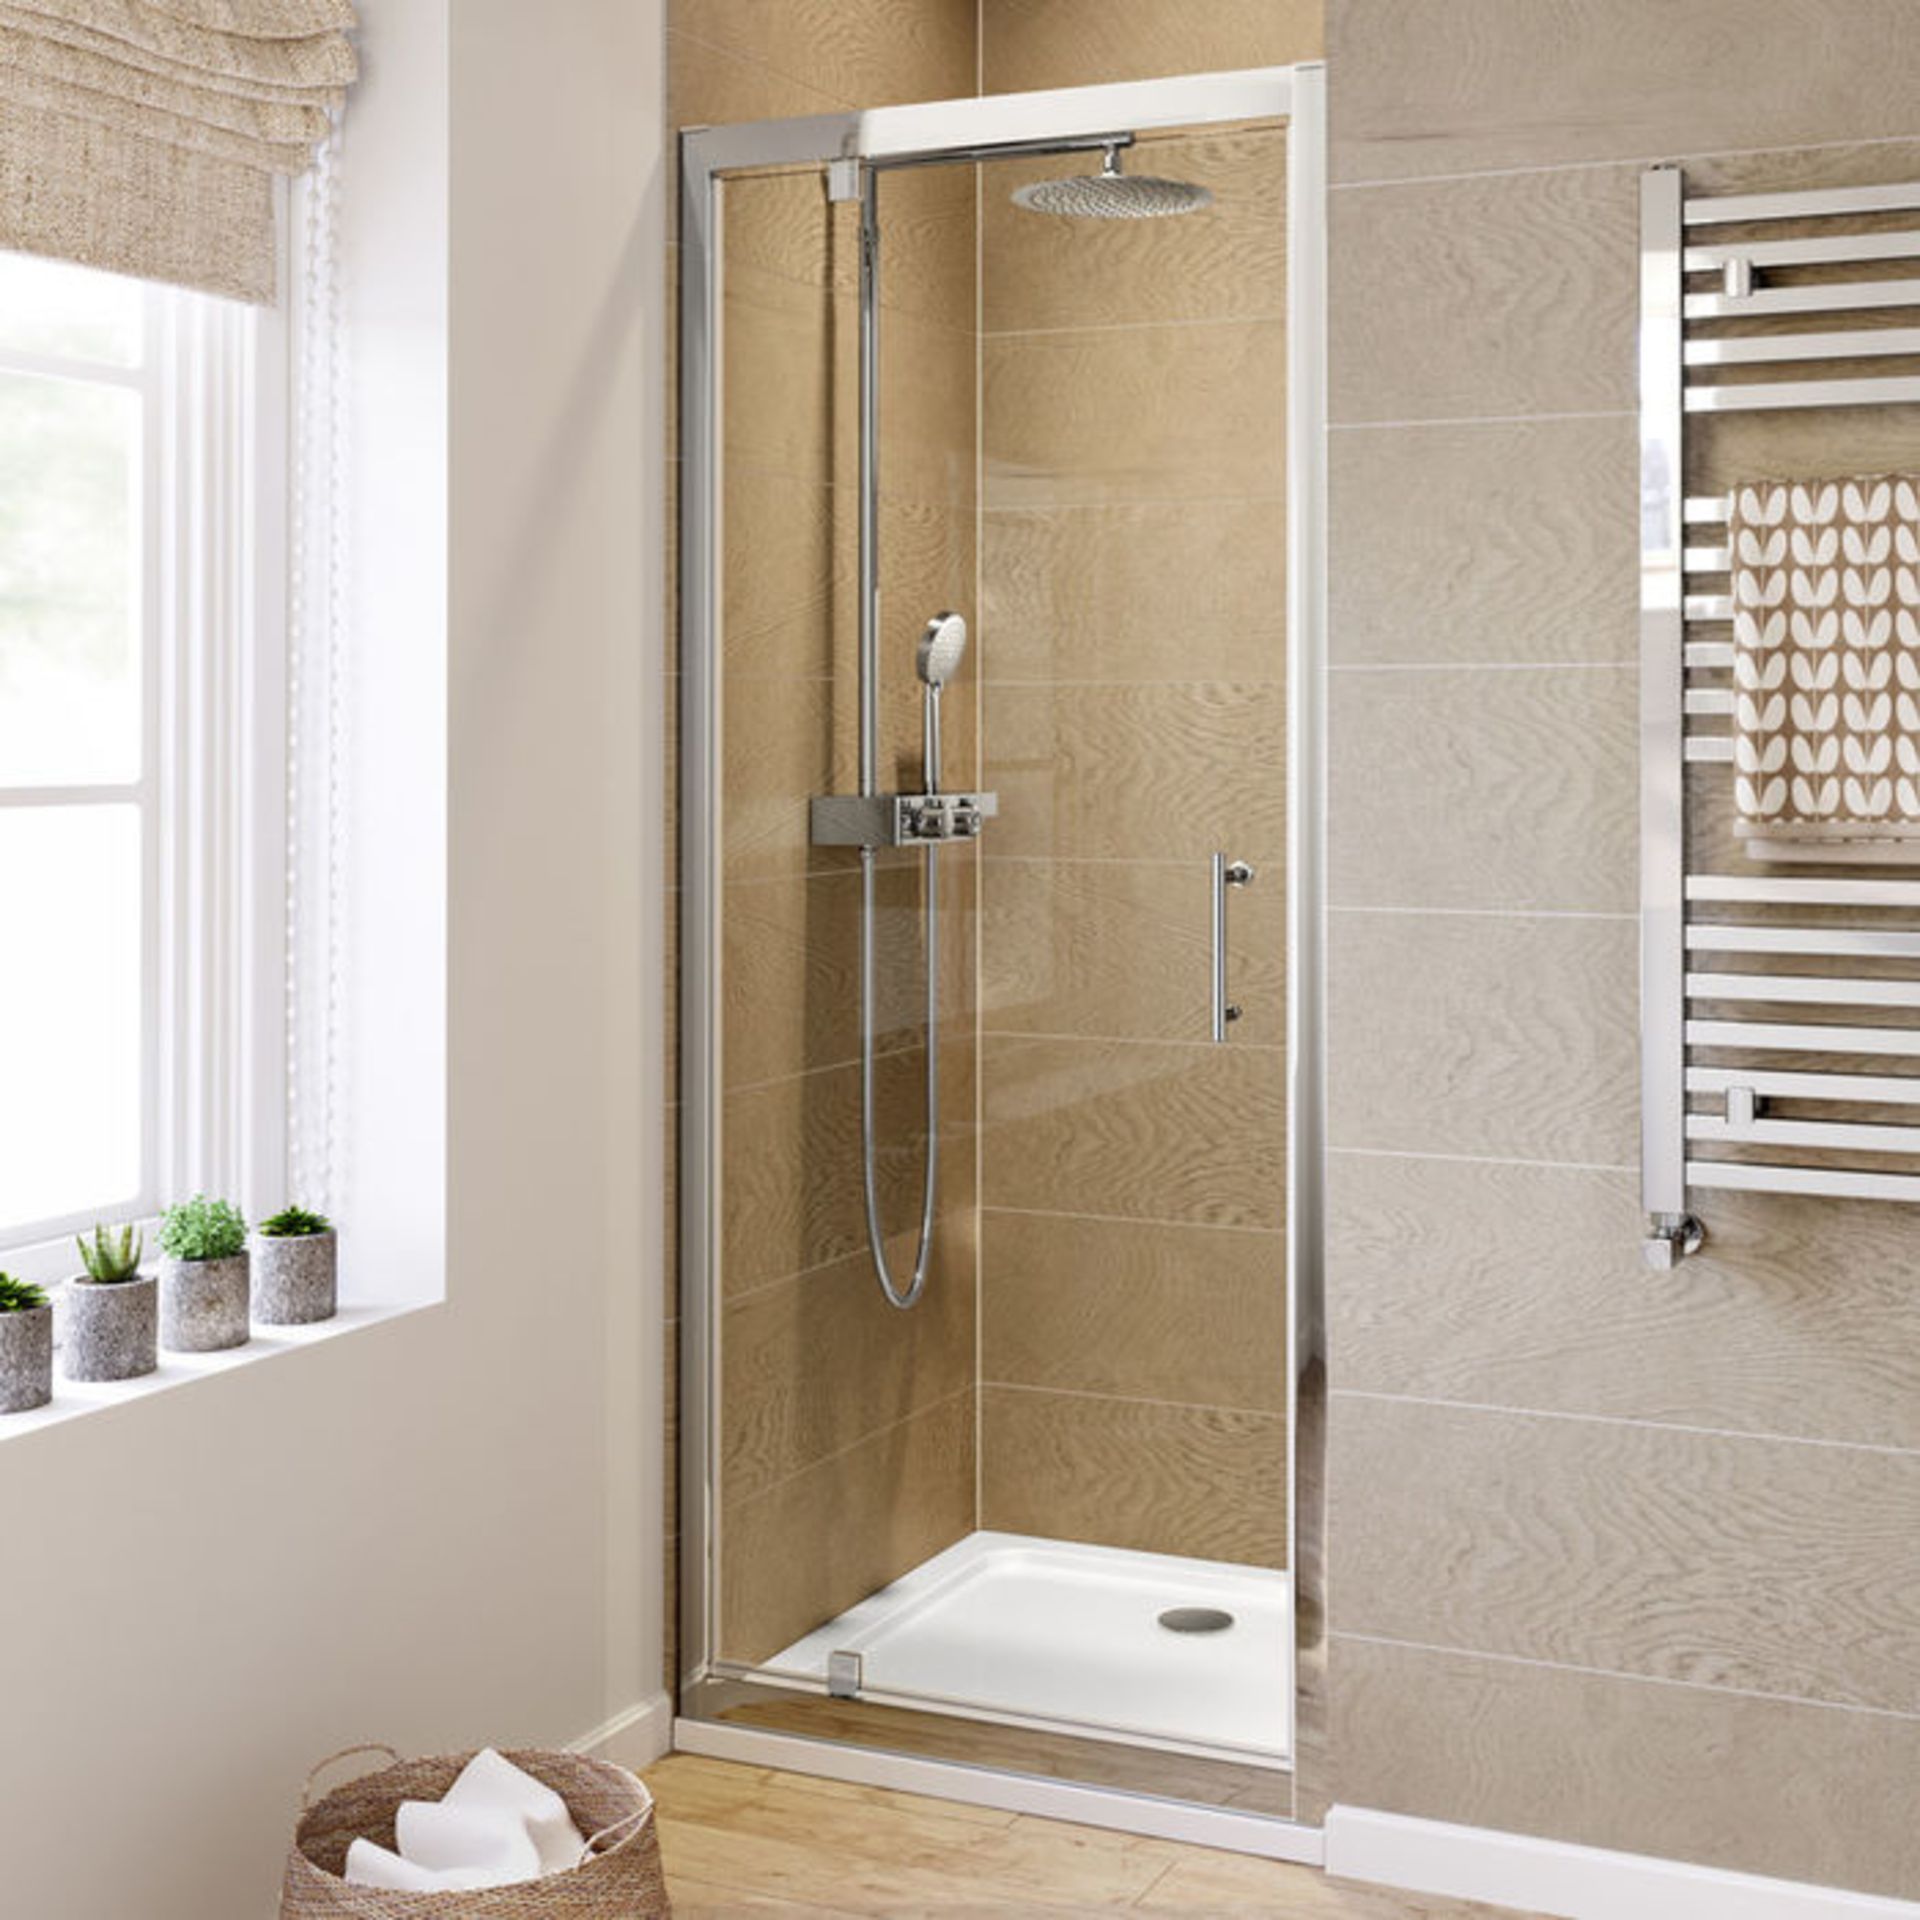 New (P126) 760mm 6mm - Elements Pivot 760mm Shower Door 6mm. Safety Glass Fully Waterproof - Image 2 of 2